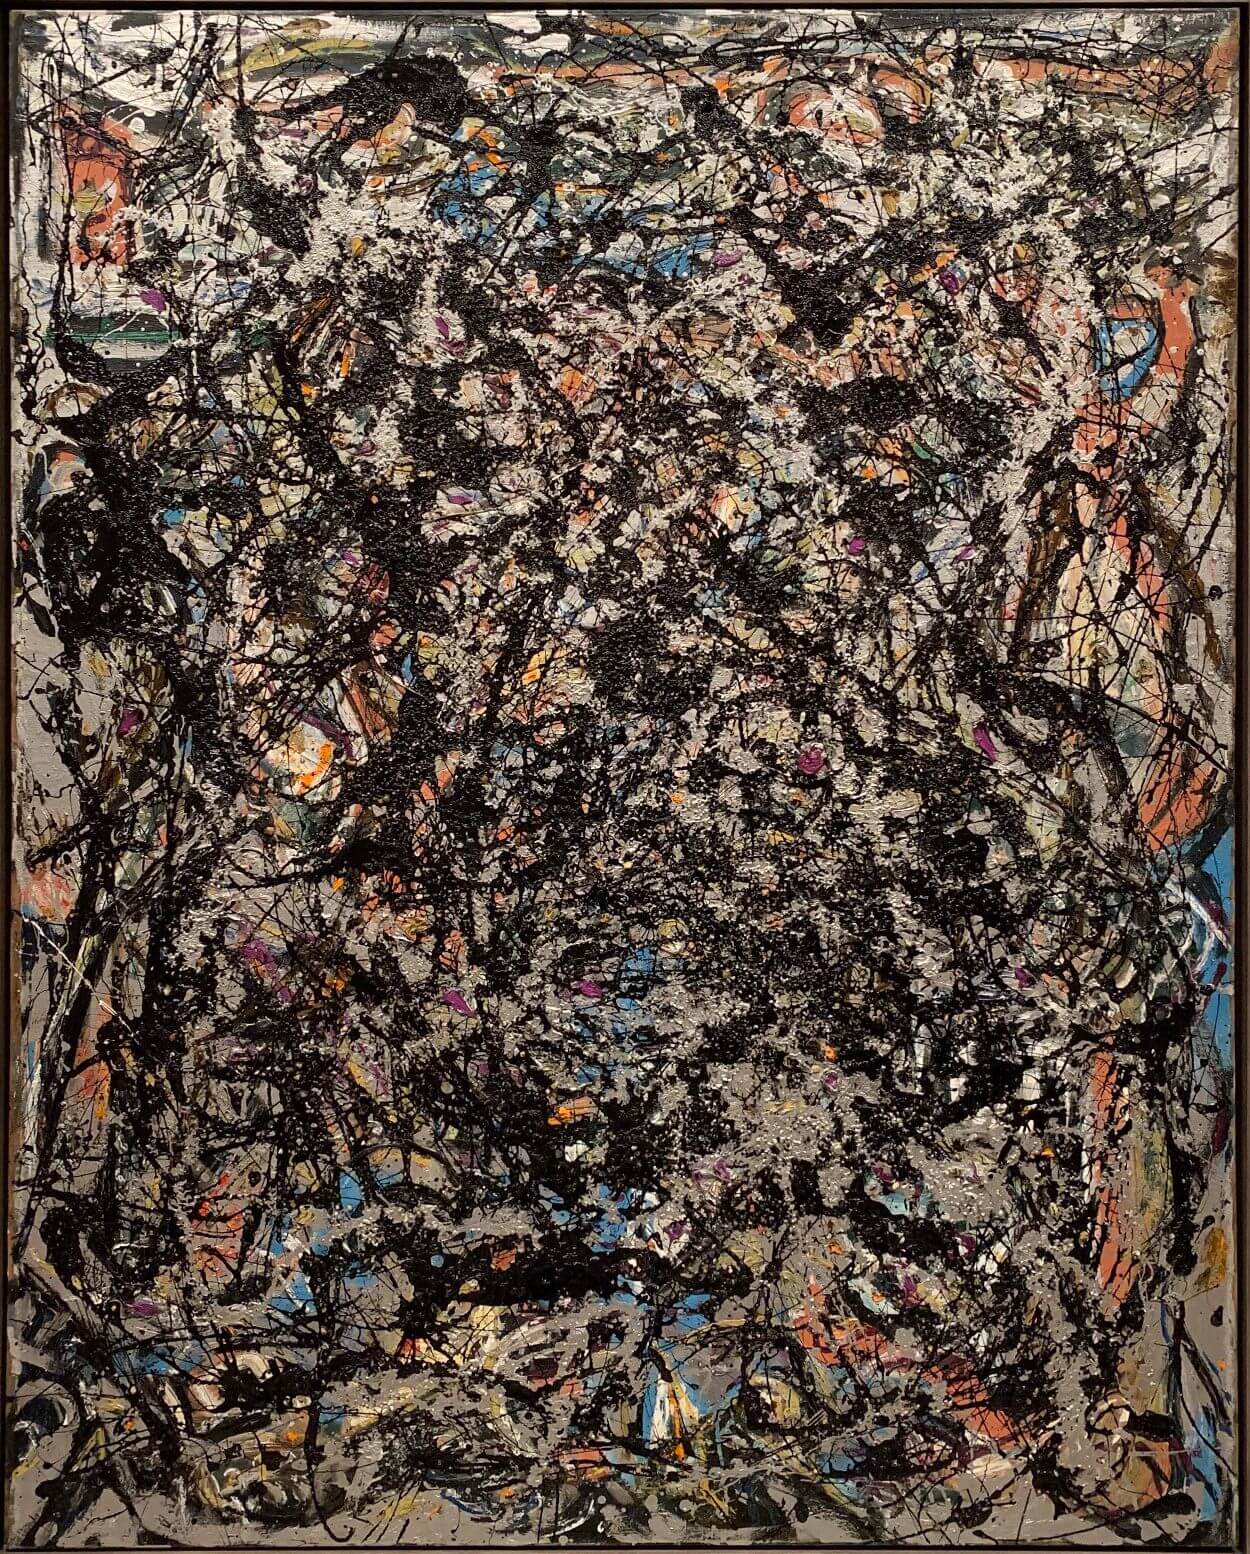 Sea Change Jackson Pollock Abstract Expressionism Painting Art Prints